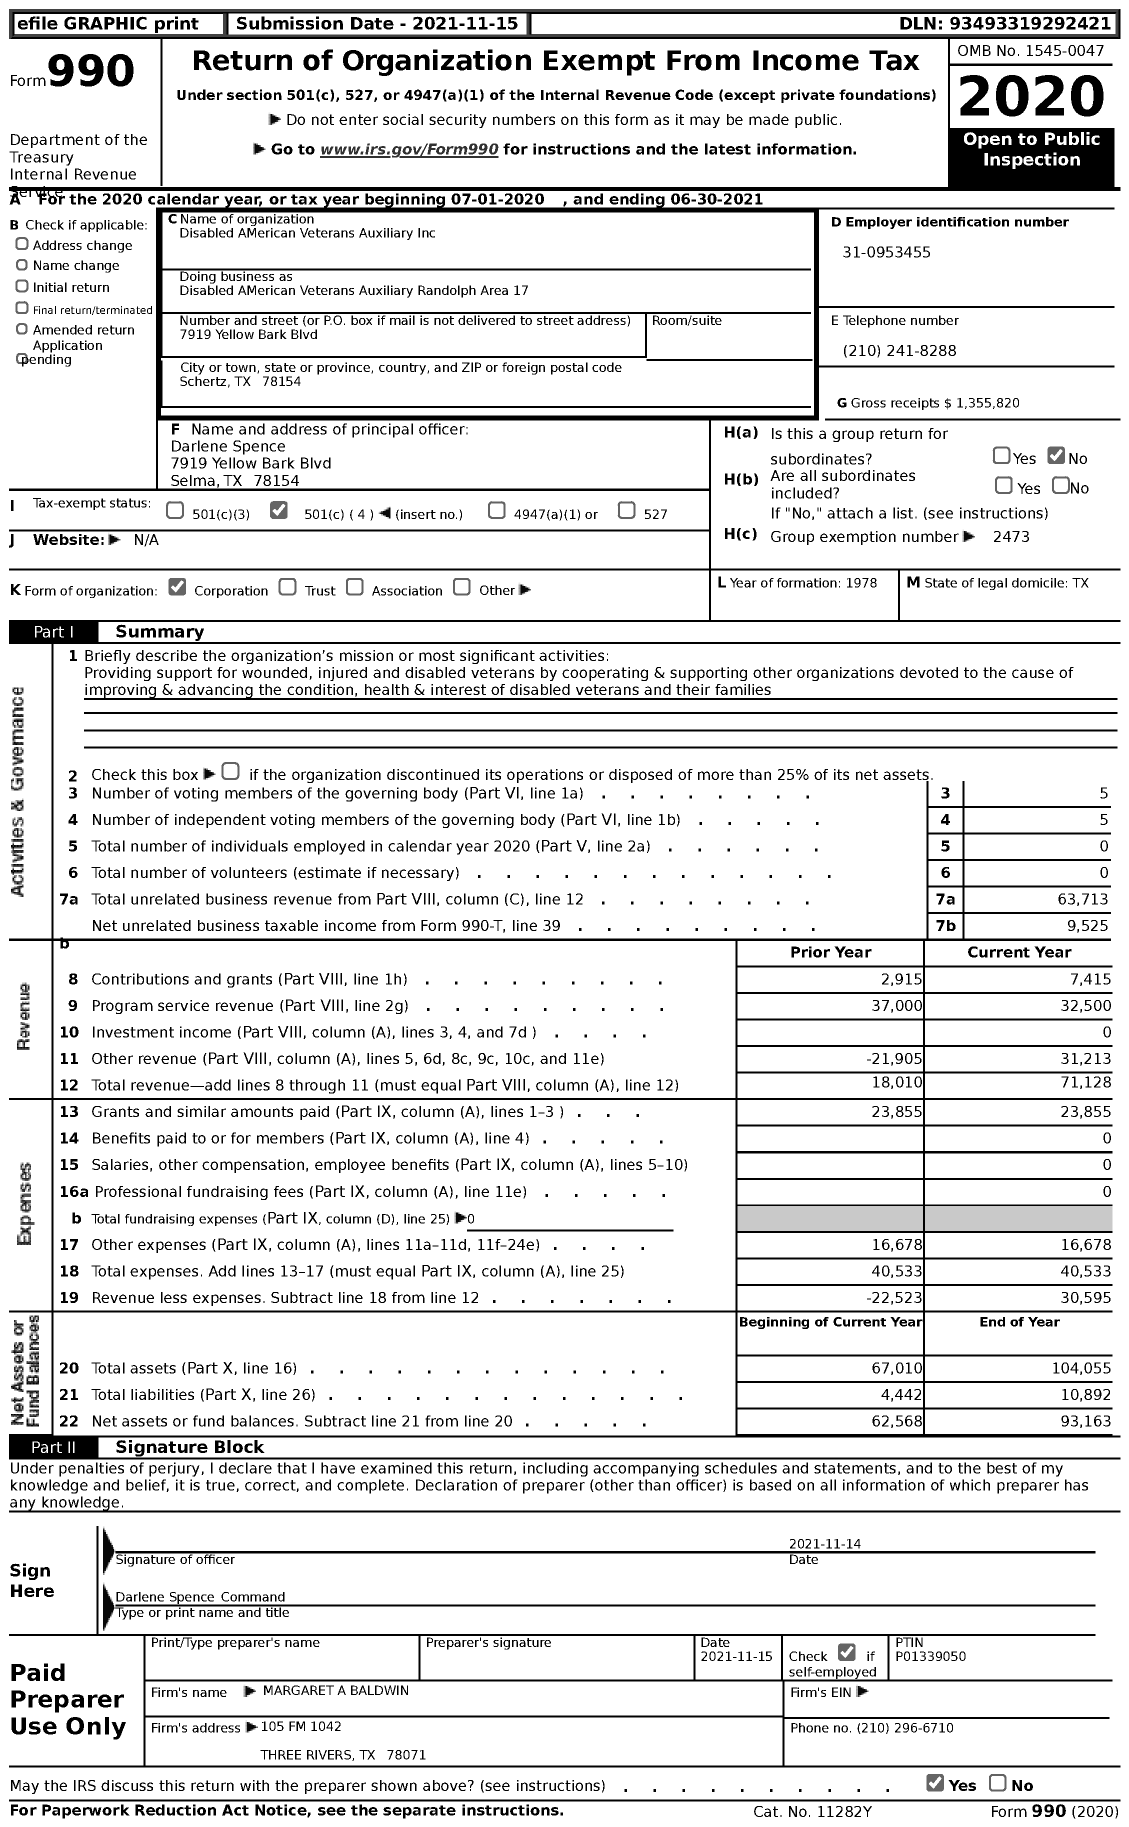 Image of first page of 2020 Form 990 for Disabled AMerican Veterans Auxiliary - Disabled AMerican Veterans Auxiliary Randolph Area 17